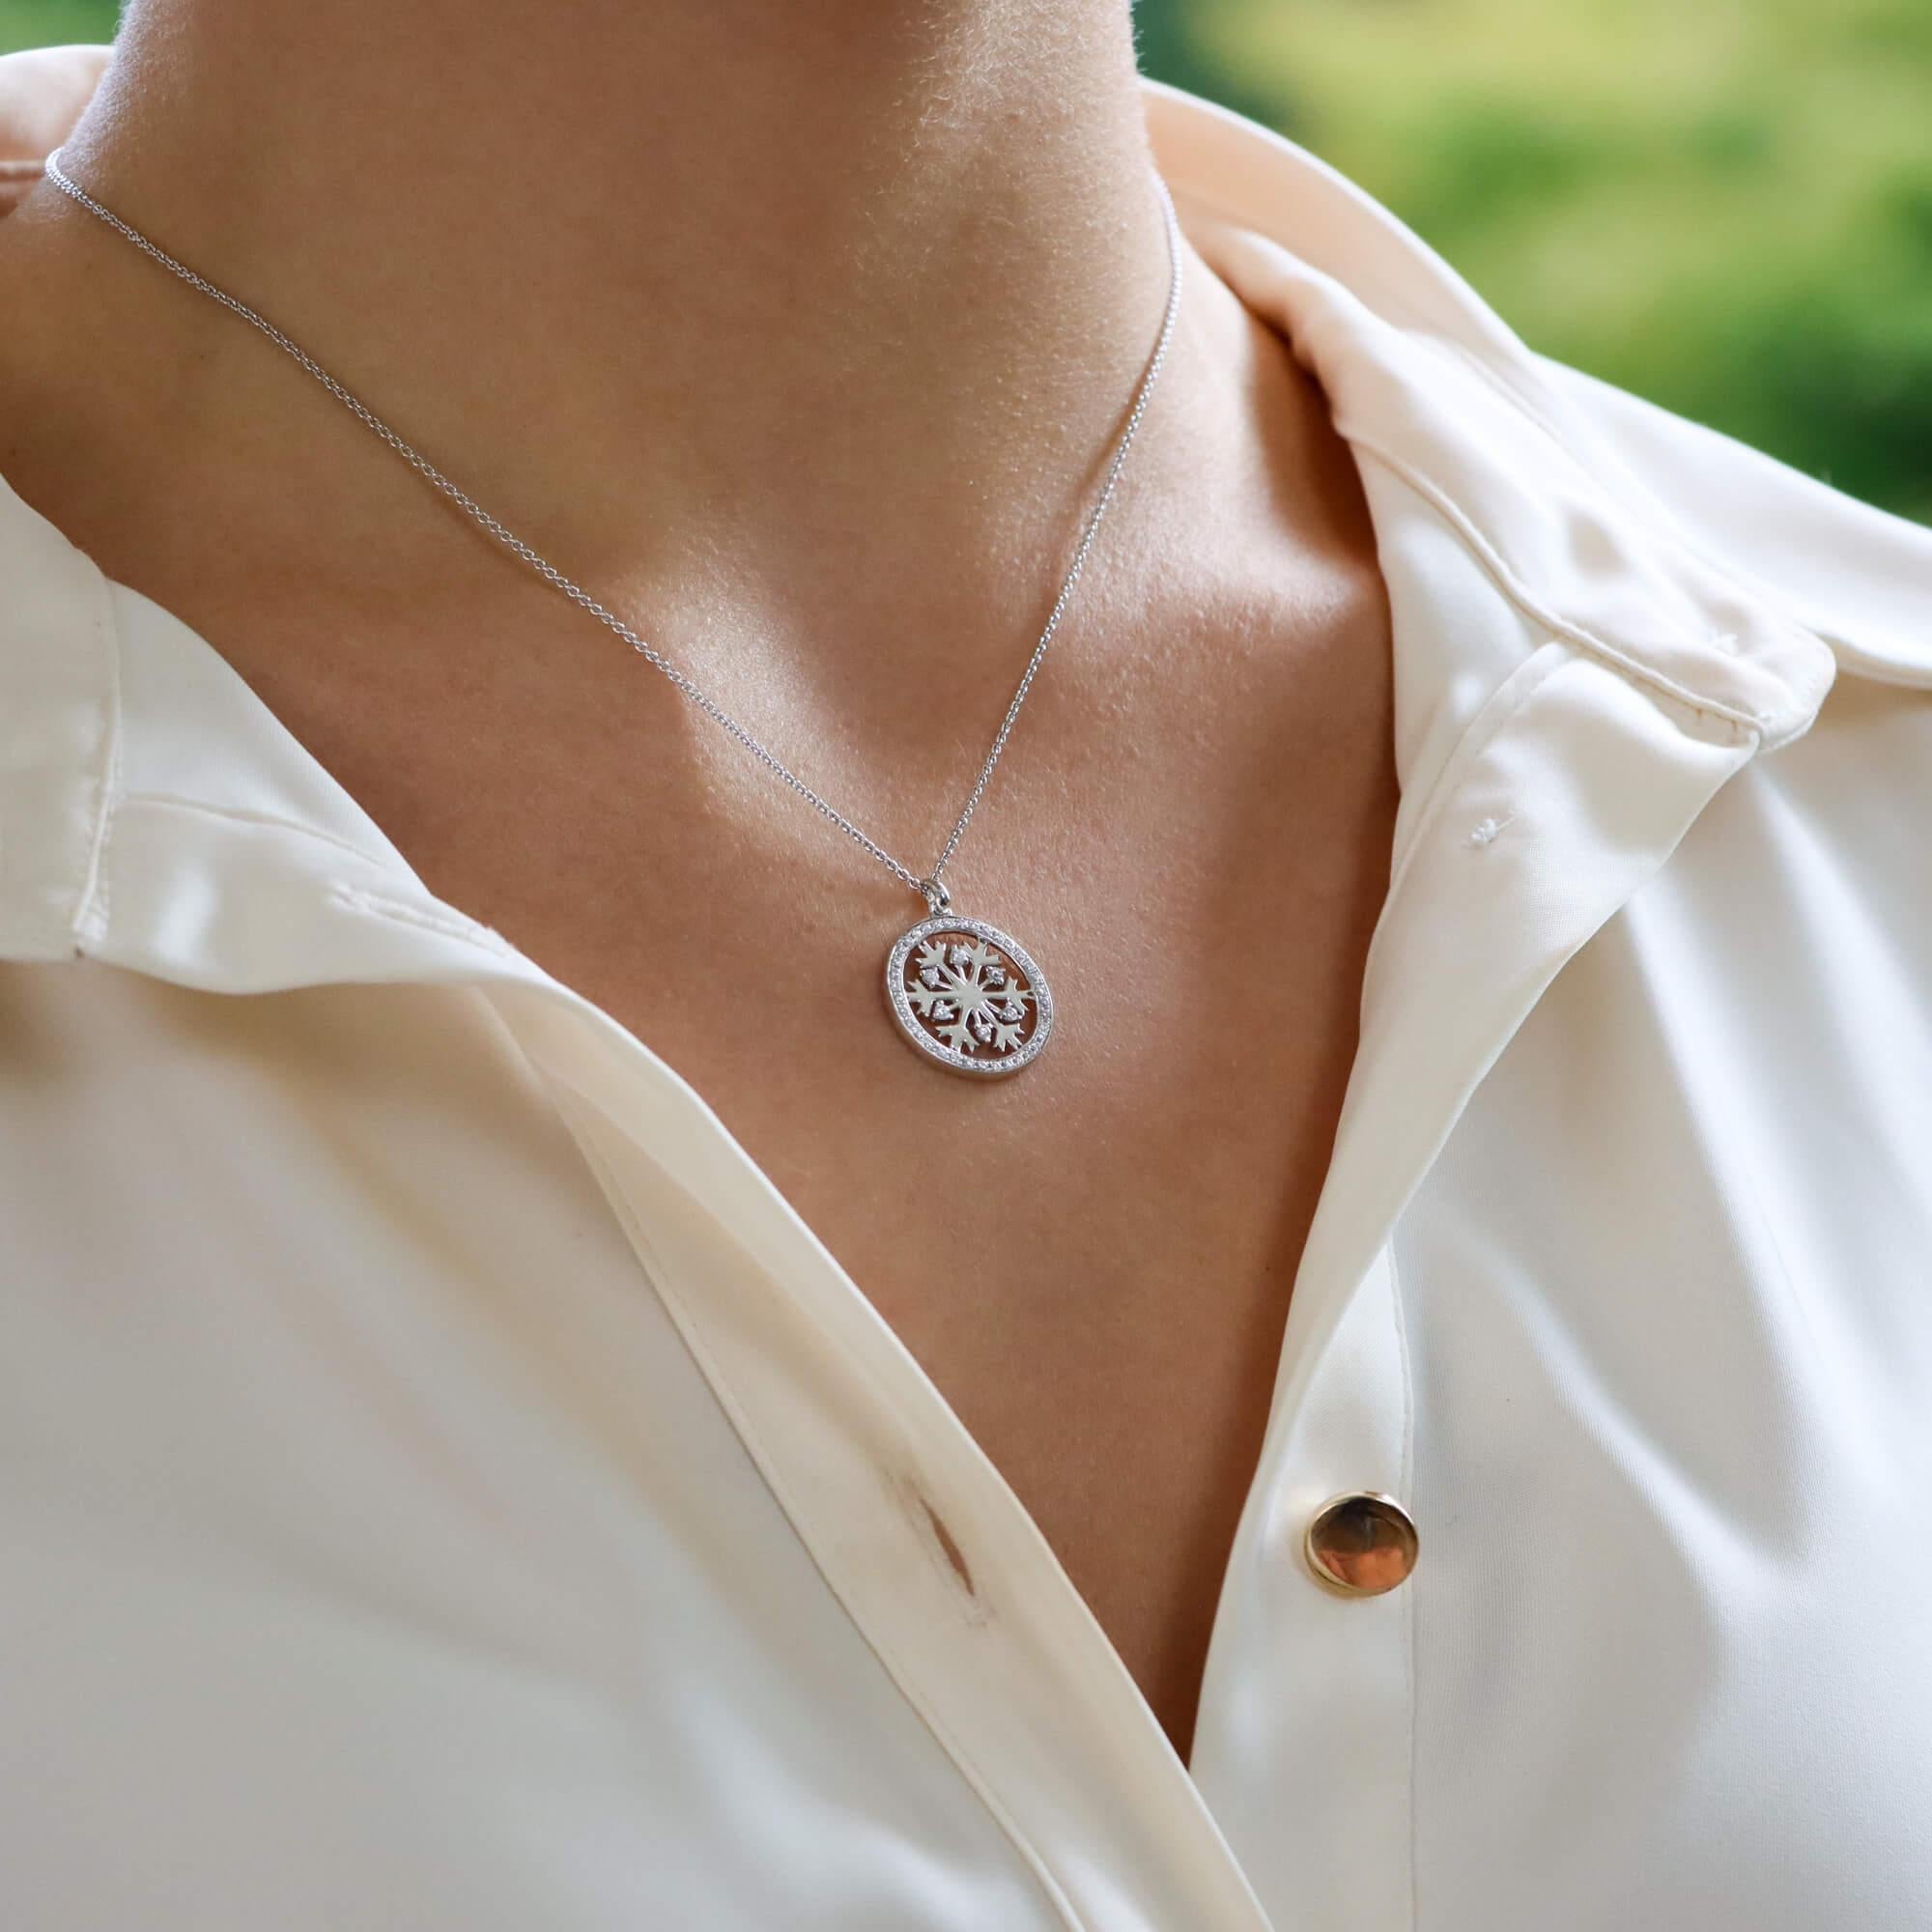 A beautiful diamond set snowflake pendant set in 18k white gold.

This pretty little pendant is centrally set with a polished white gold snowflake which is haloed by a ring of millegrain set diamonds. Amongst the snowflake we see 6 more round